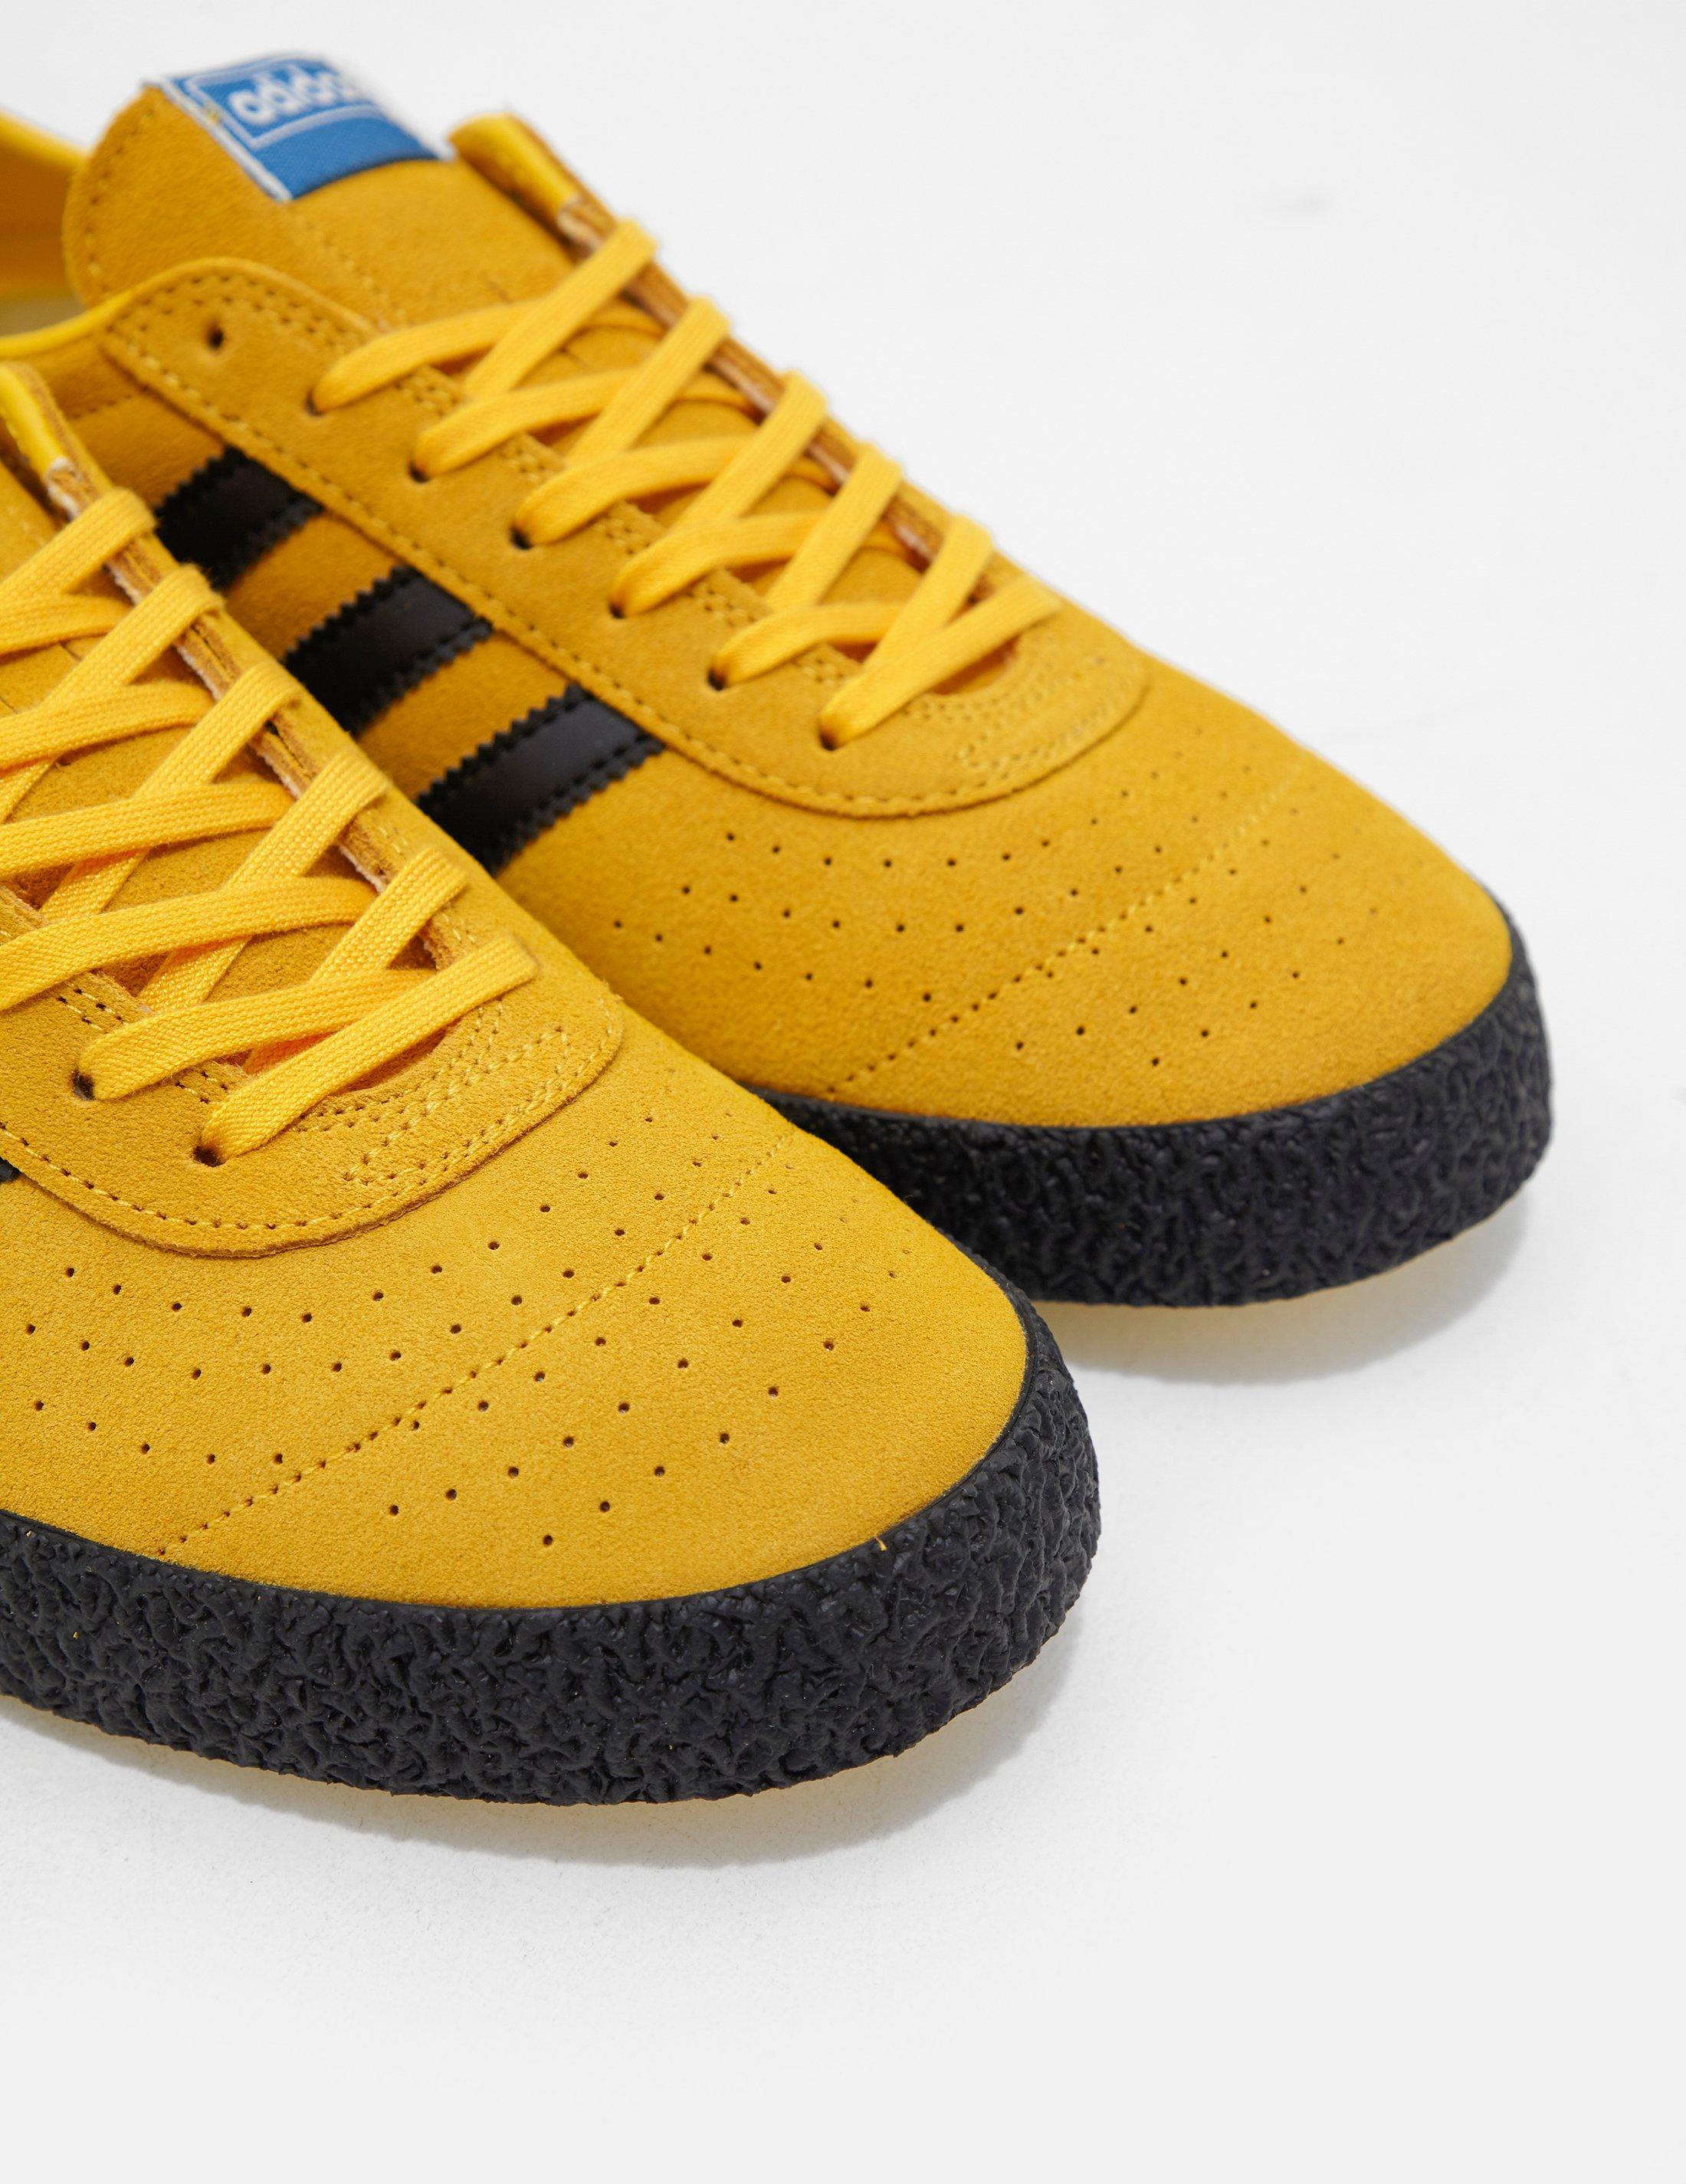 adidas Originals Leather Mens Montreal 76 Yellow for Men - Lyst